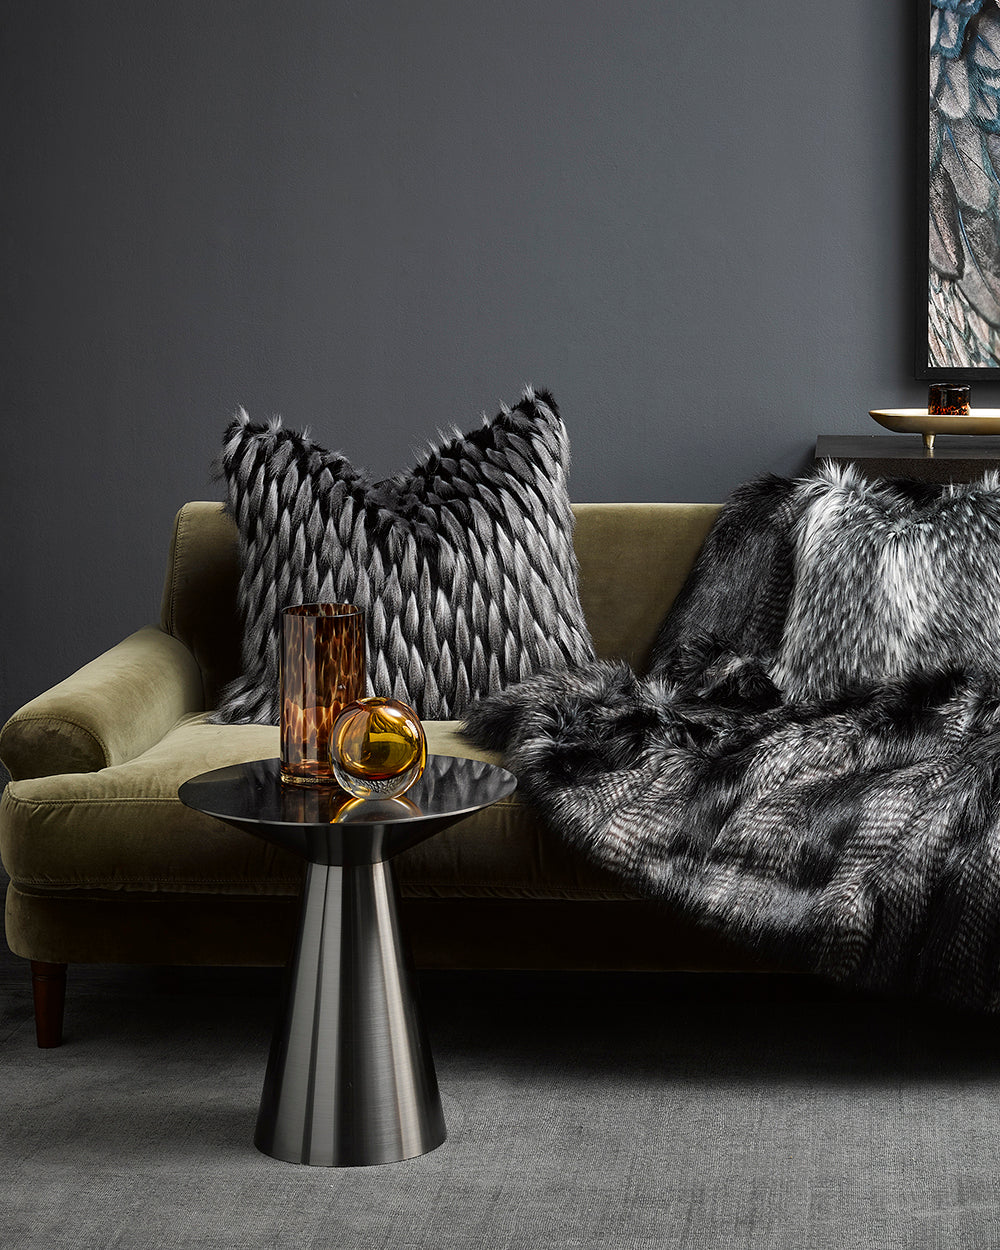 Heirloom Guinea Fowl Cushions in Faux Fur are available from Make Your House A Home Premium Stockist. Furniture Store Bendigo, Victoria. Australia Wide Delivery. Furtex Baya.